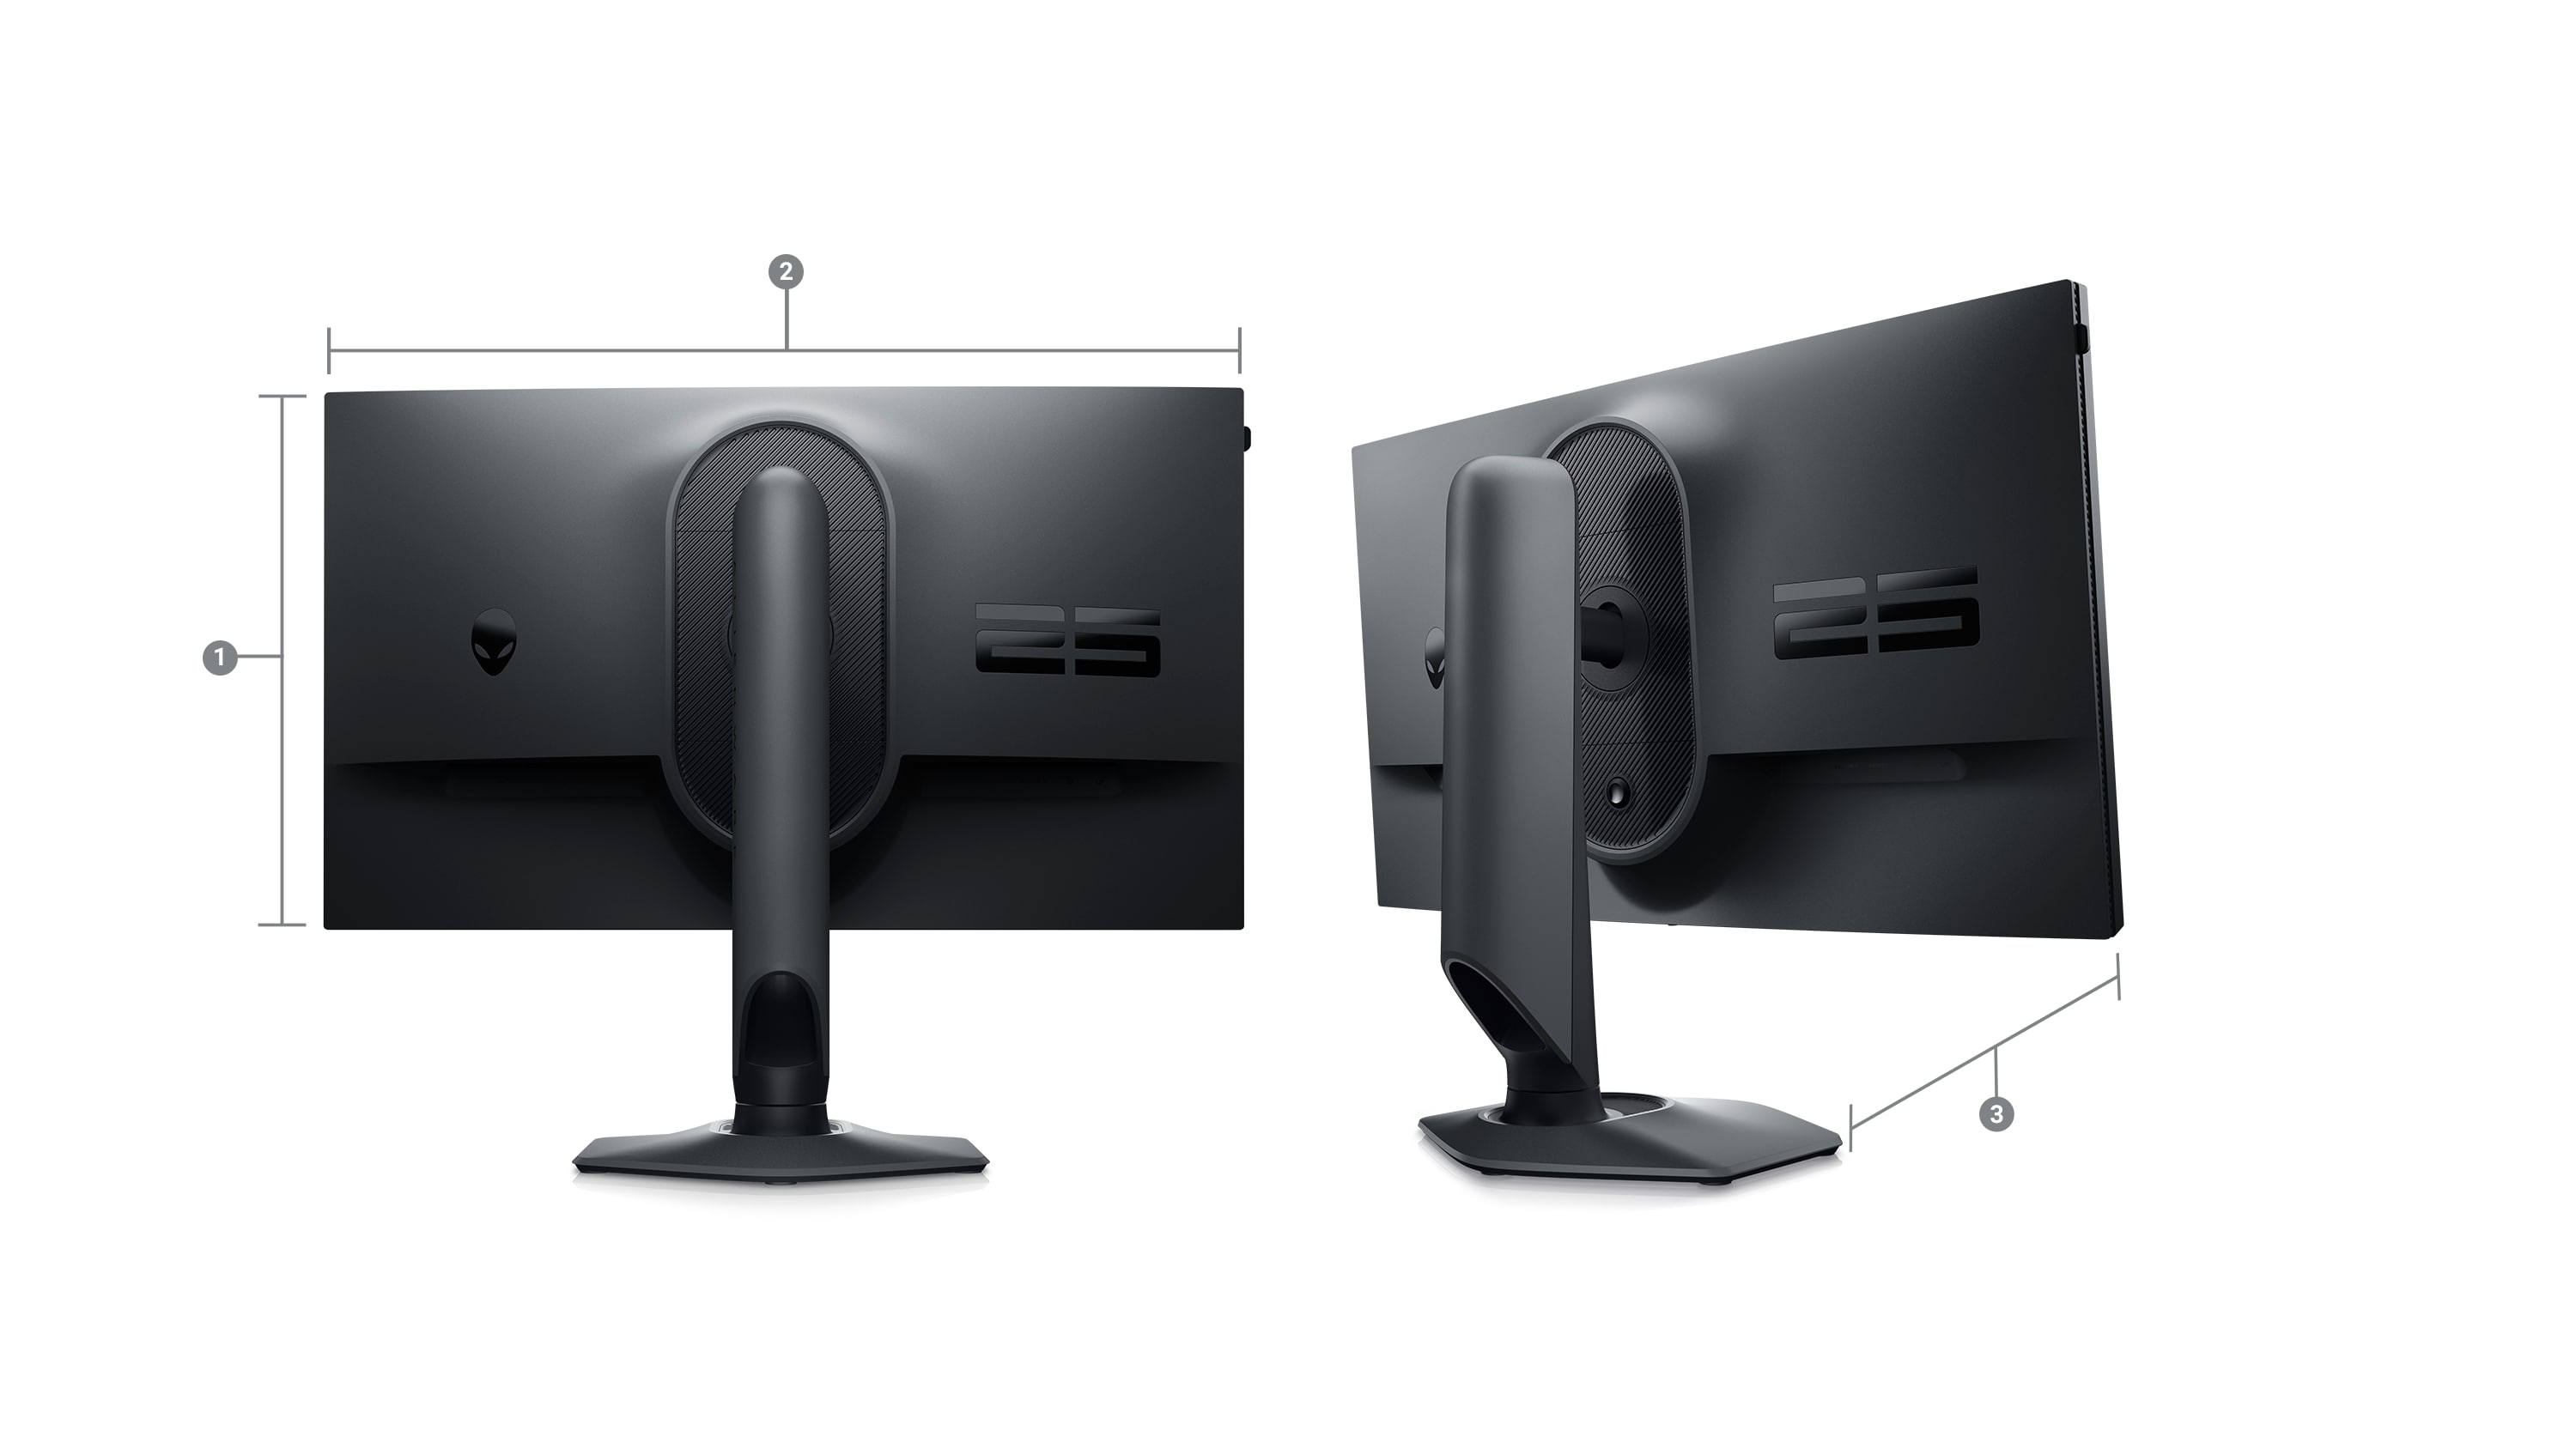 Picture of two Dell AW2523HF Gaming Monitors with numbers from 1 to 3 signaling product dimensions & weight.